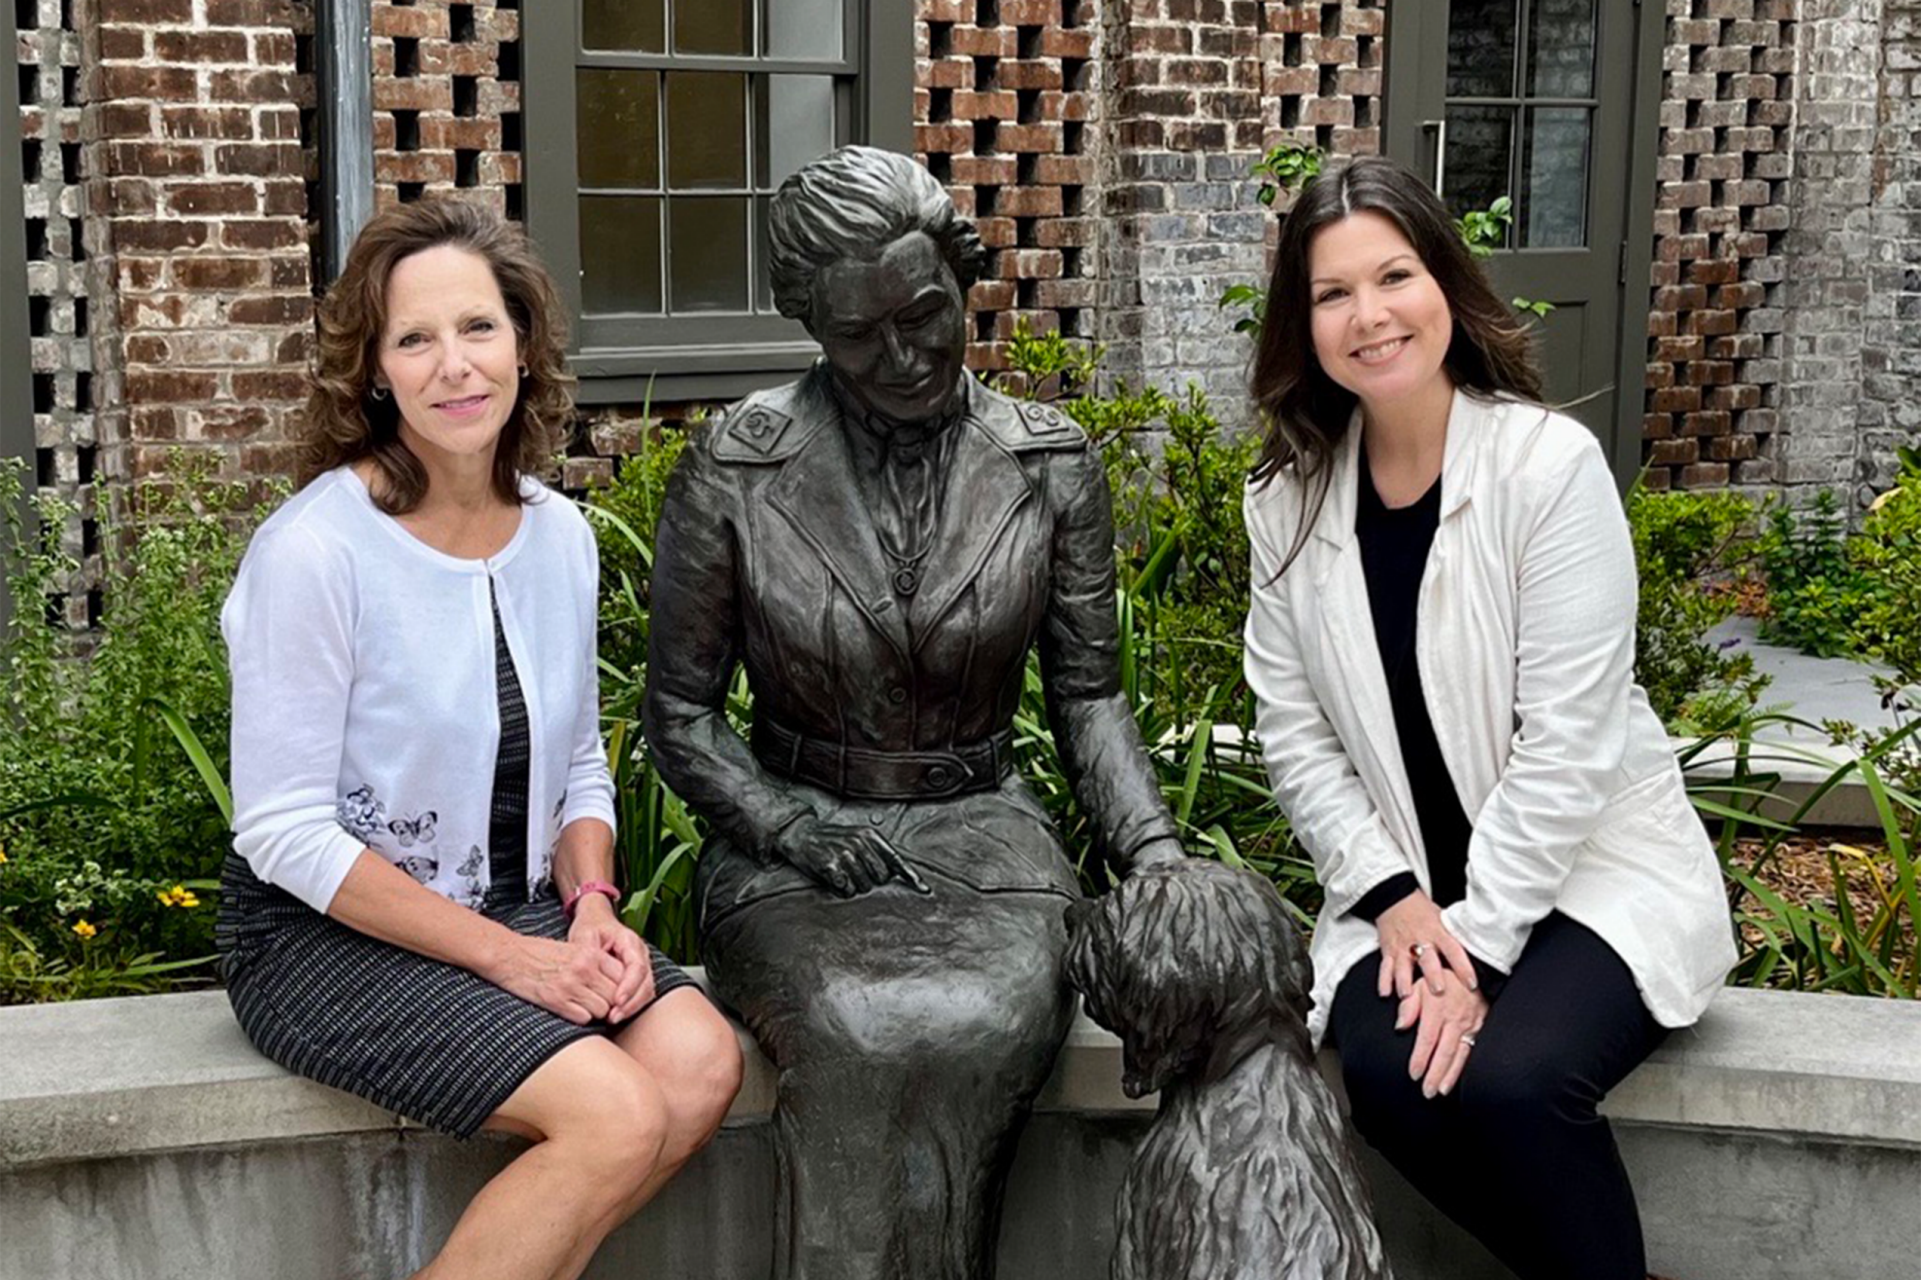 Stacy Cordery and the director of the Birthplace sitting next to a statue of Juliette Gordon Low in the gaden.